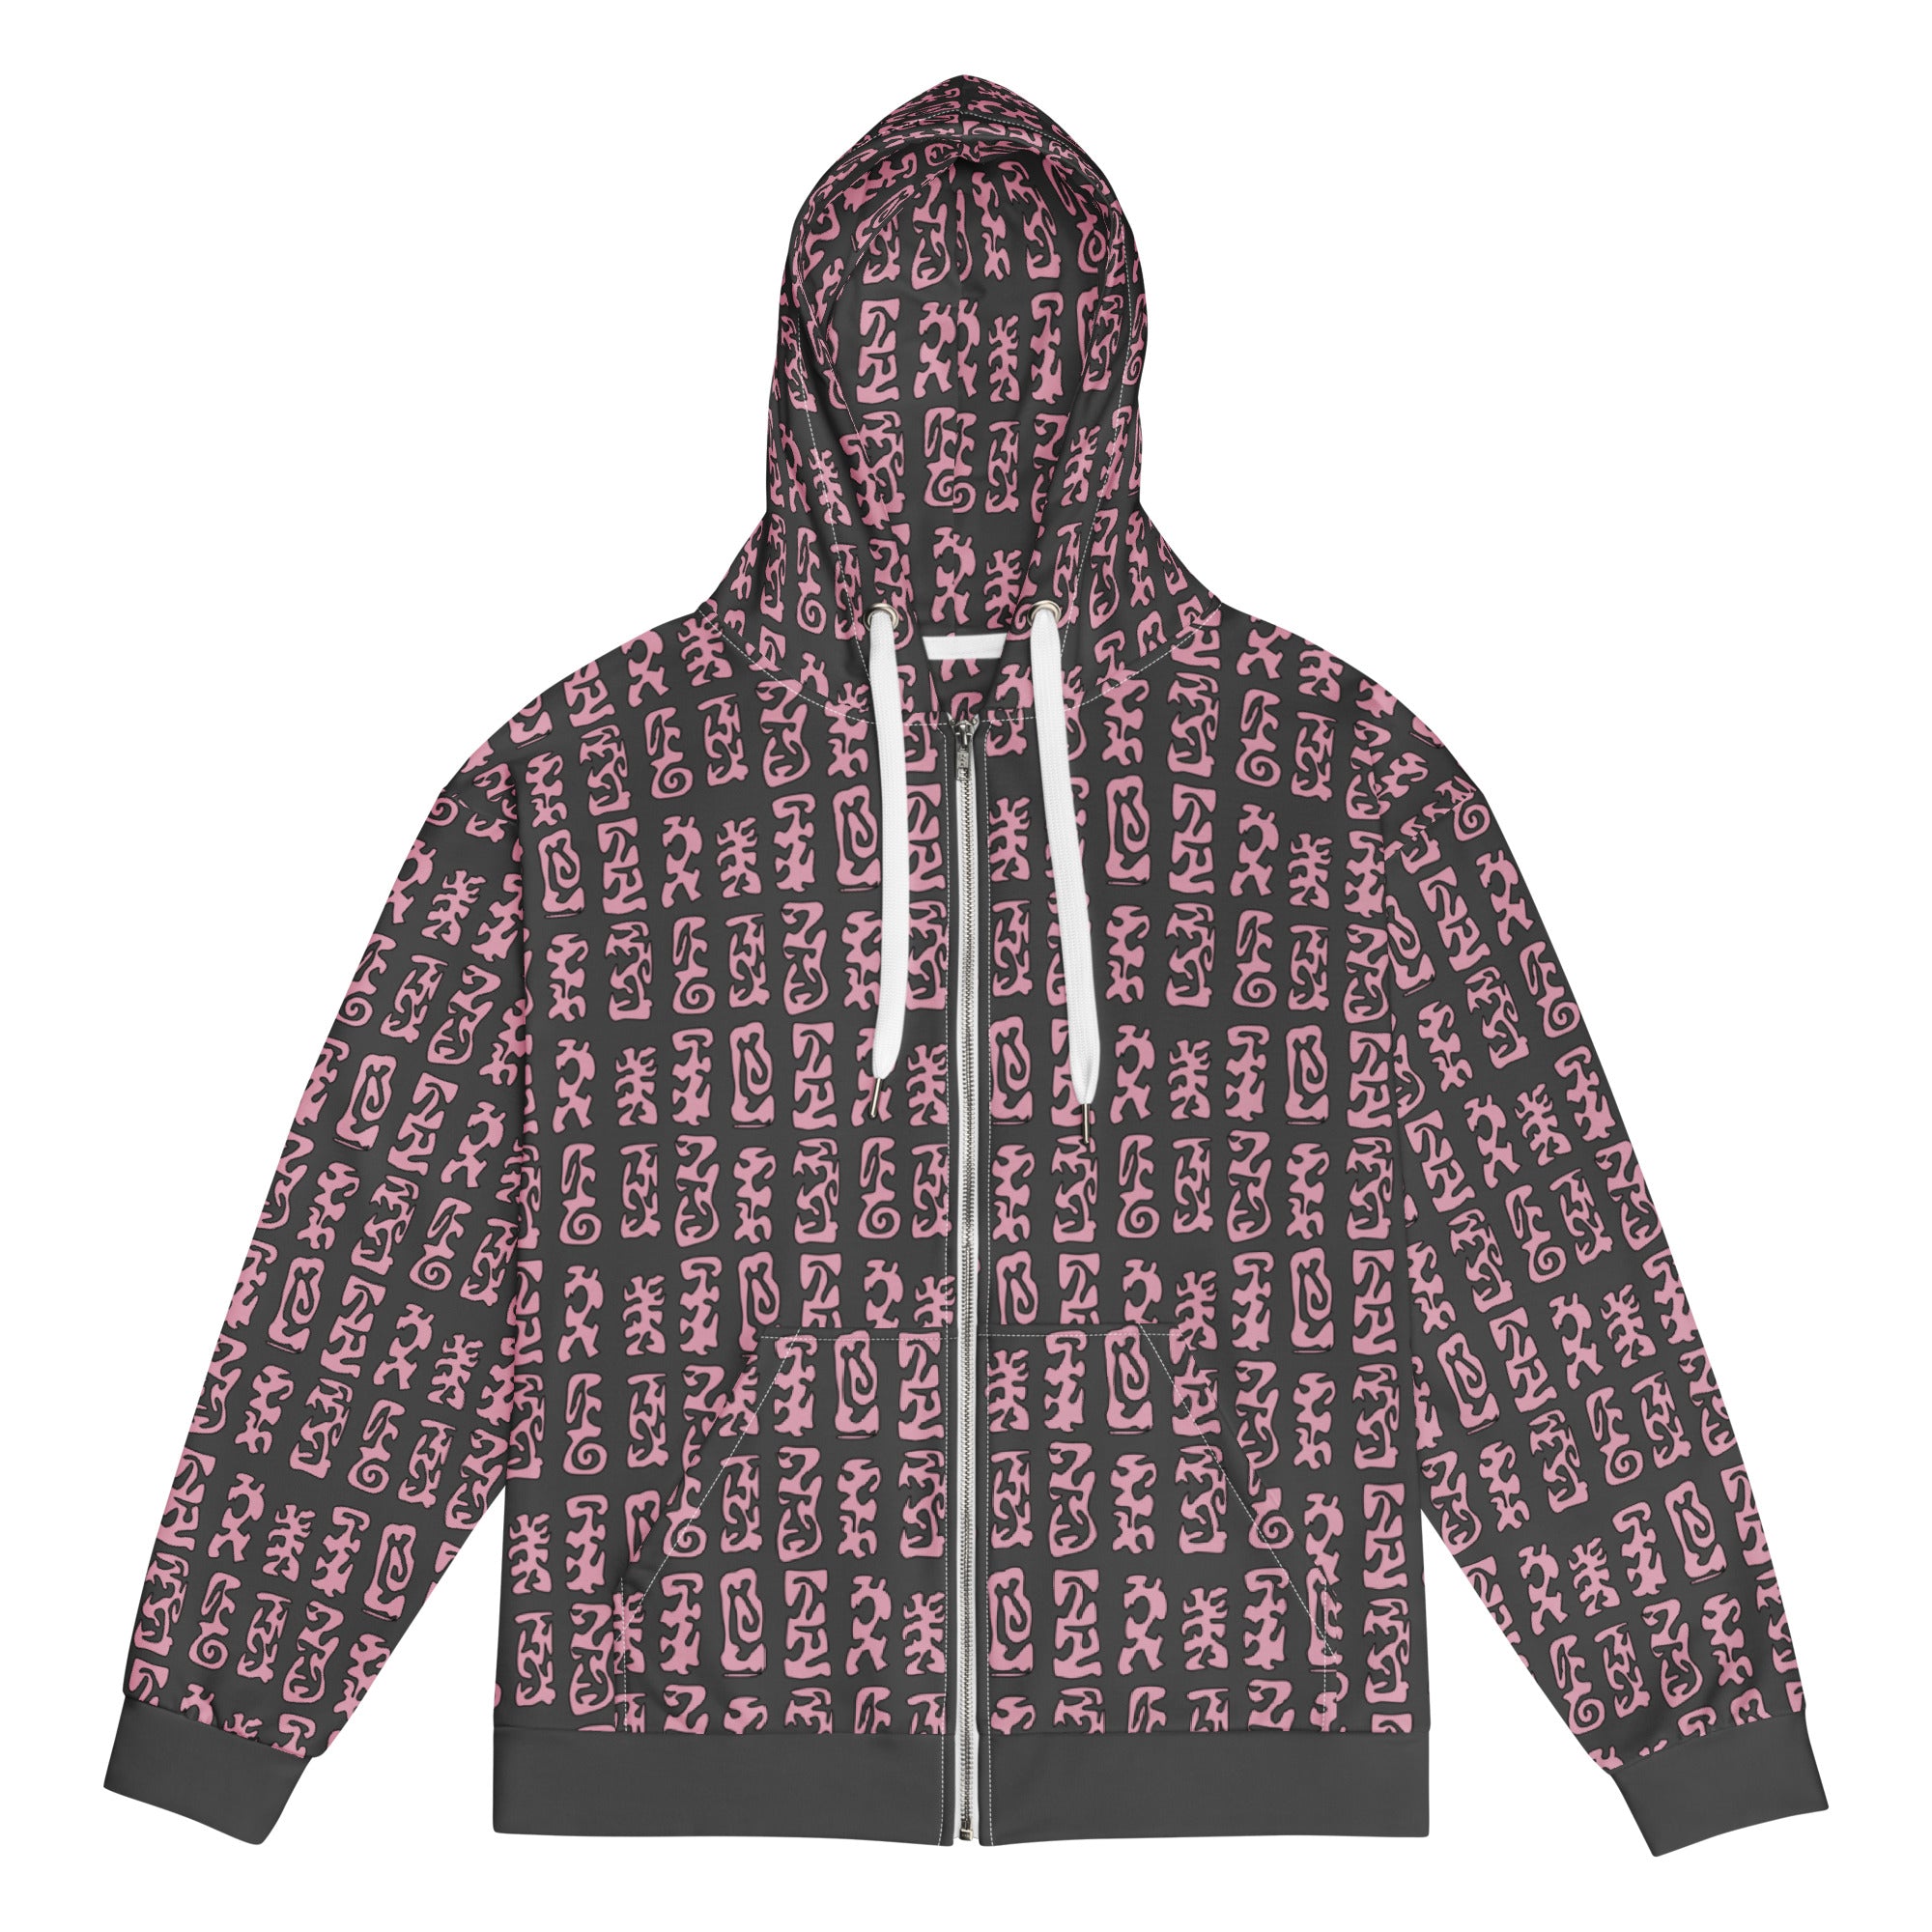 all-over-print-recycled-unisex-zip-hoodie-white-front-65b0af32c78c7.jpg